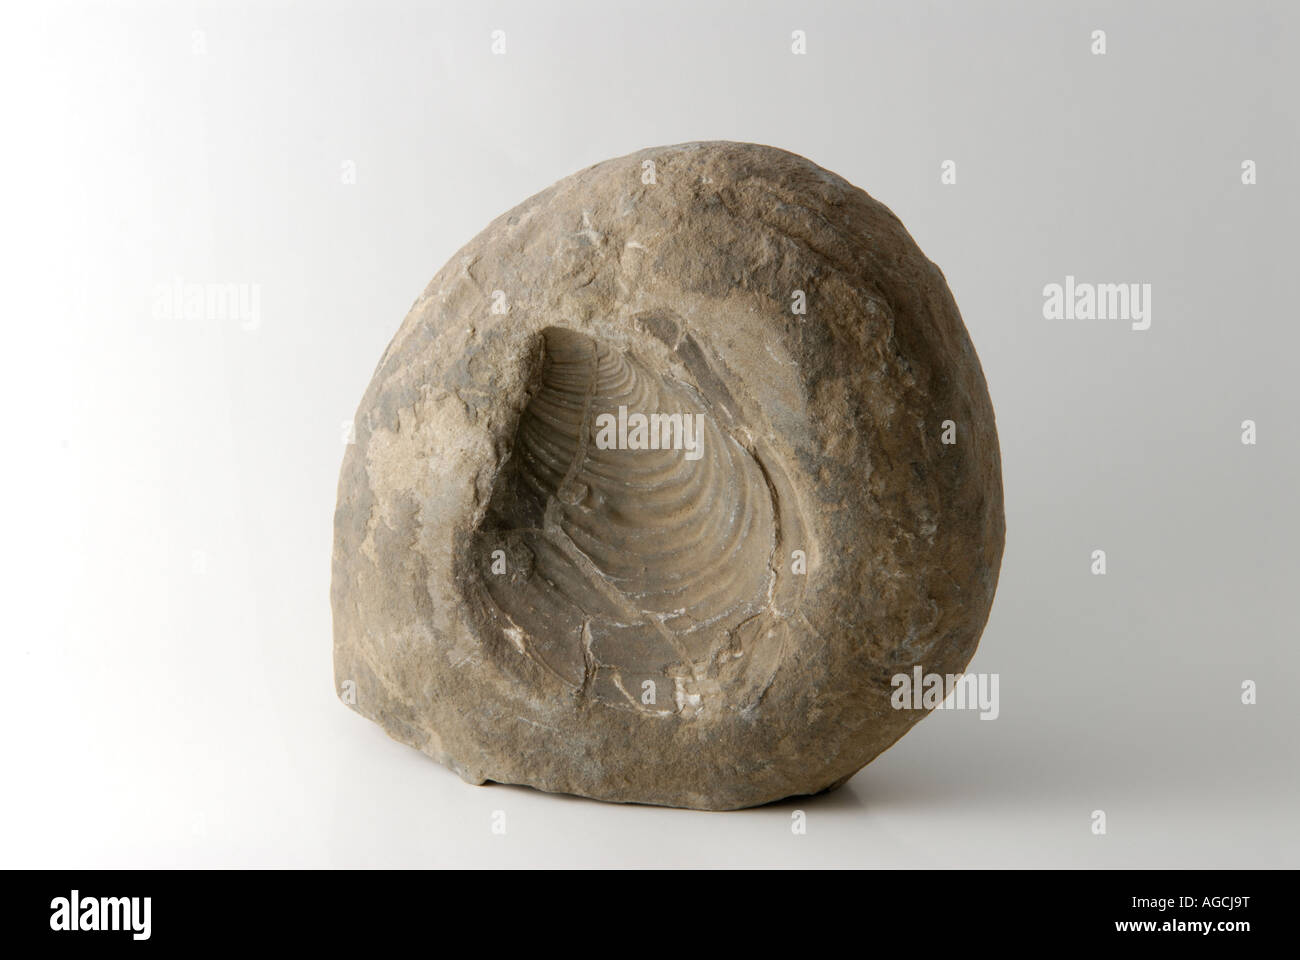 A mold or cast fossil of an ancient marine bivalve Stock Photo